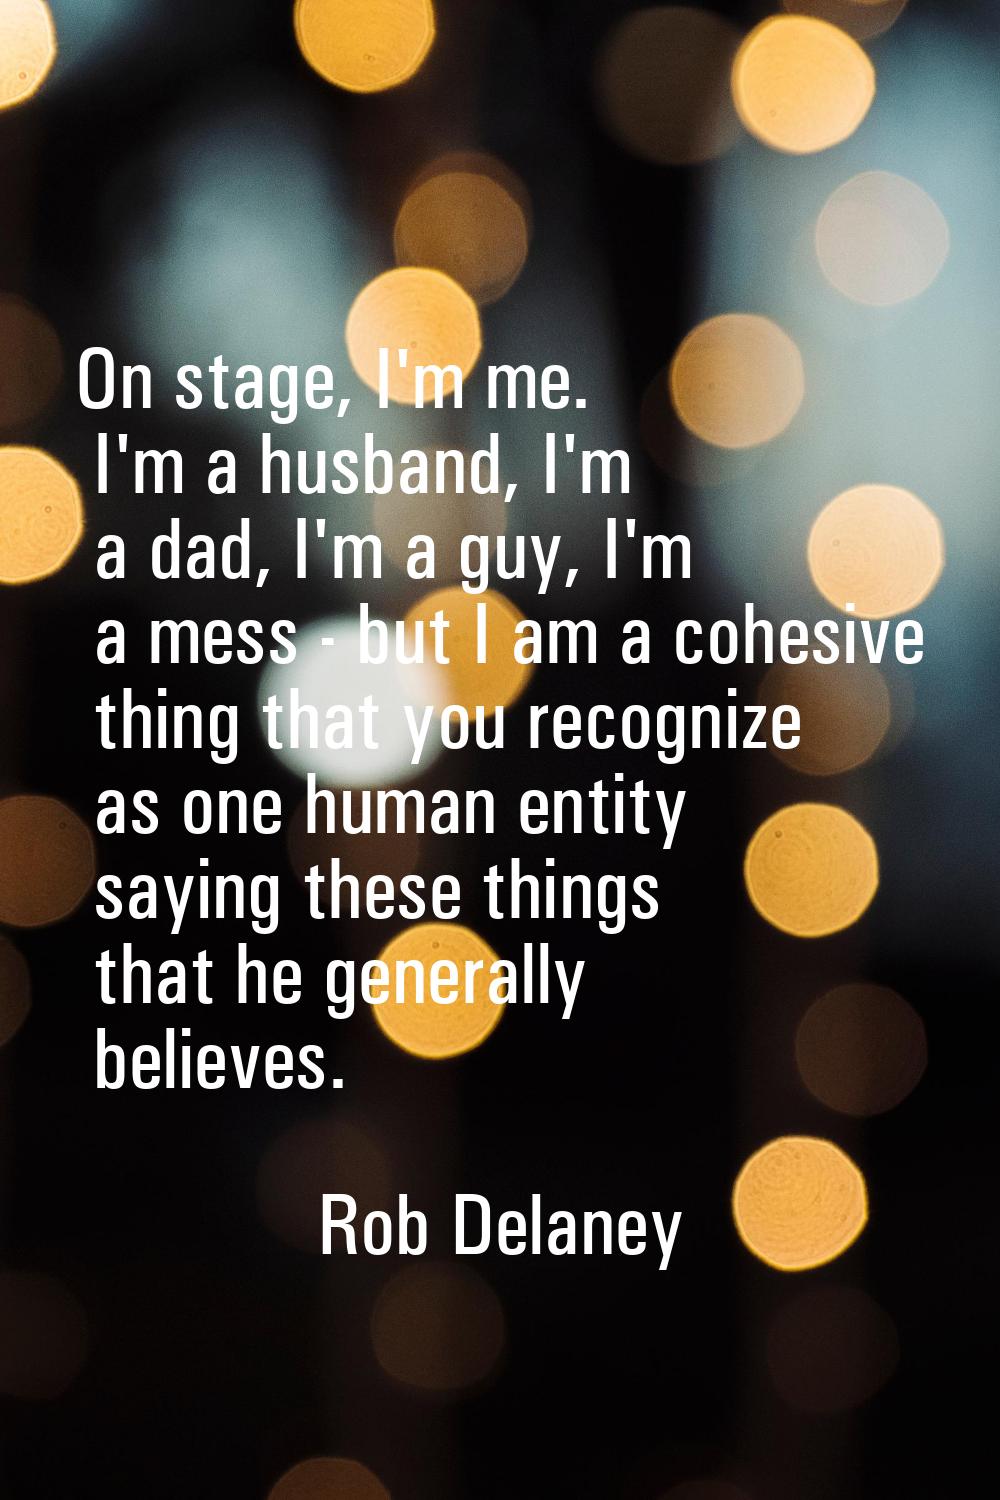 On stage, I'm me. I'm a husband, I'm a dad, I'm a guy, I'm a mess - but I am a cohesive thing that 